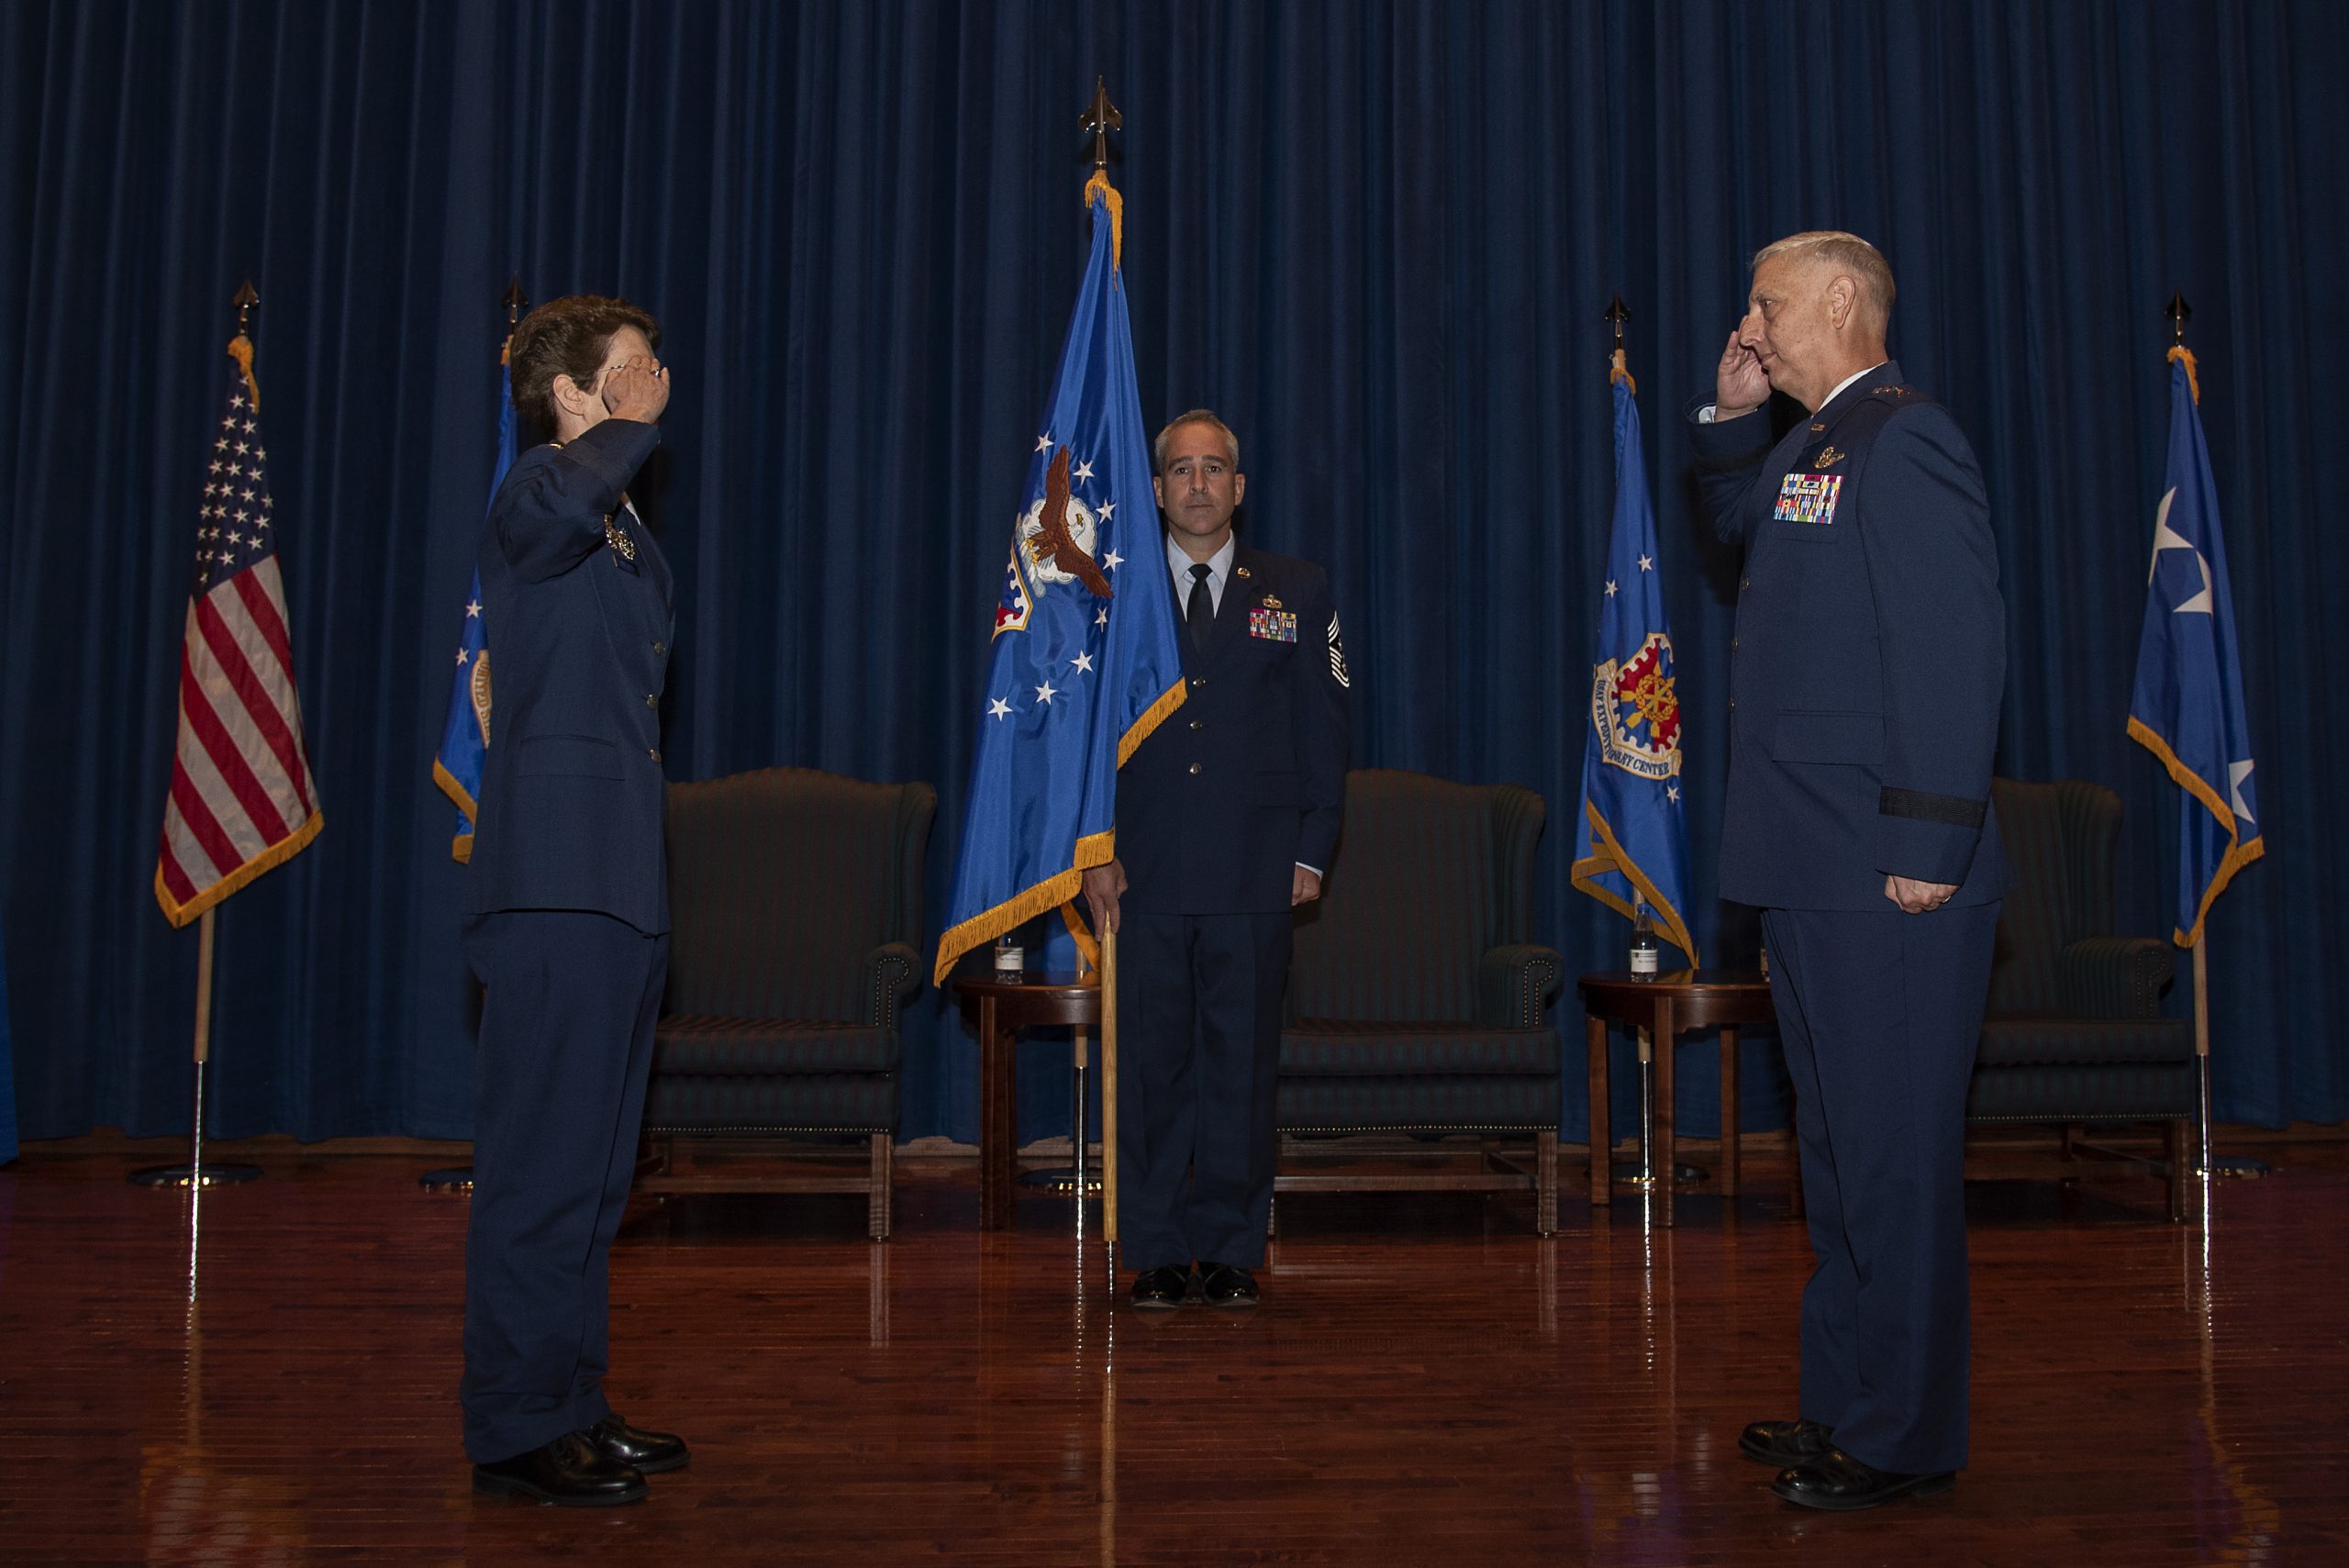 U.S. Air Force Maj. Gen. Mark Camerer assumed command of the U.S. Air Force Expeditionary Center during a change of command ceremony Sept. 23, 2020, at the USAF Expeditionary Center on Joint Base McGuire-Dix-Lakehurst, New Jersey. U.S. Air Force Gen. Jaqueline Van Ovost, Air Mobility Command commander, presided over the ceremony where U.S. Air Force Maj. Gen. John Gordy relinquished command of the USAF Expeditionary Center to Camerer. (U.S. Air Force photo by Master Sgt. Ashley Hyatt)